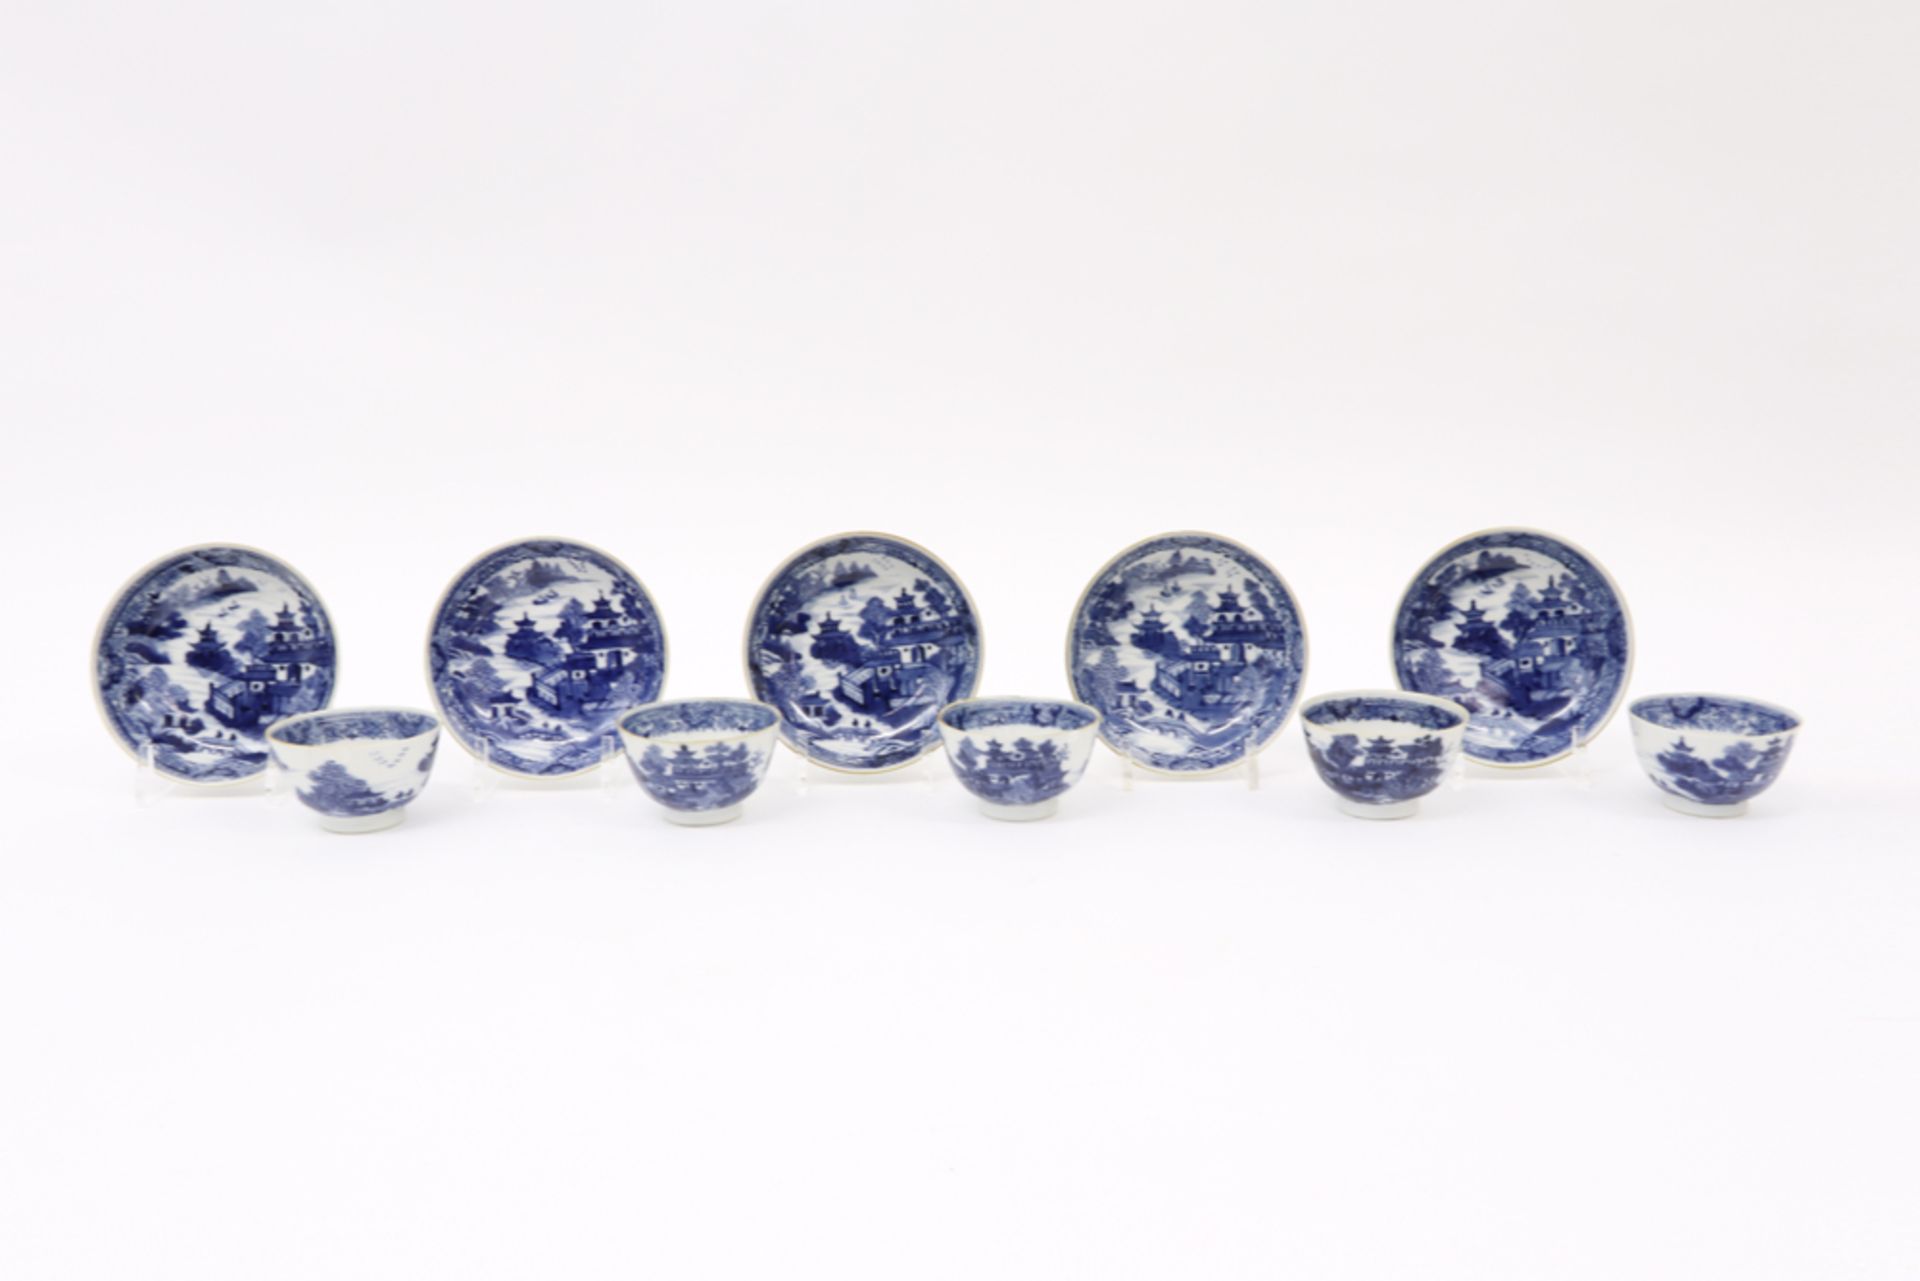 series of five 18th Cent. Chinese porcelain sets of cup and saucer with blue-white landscape